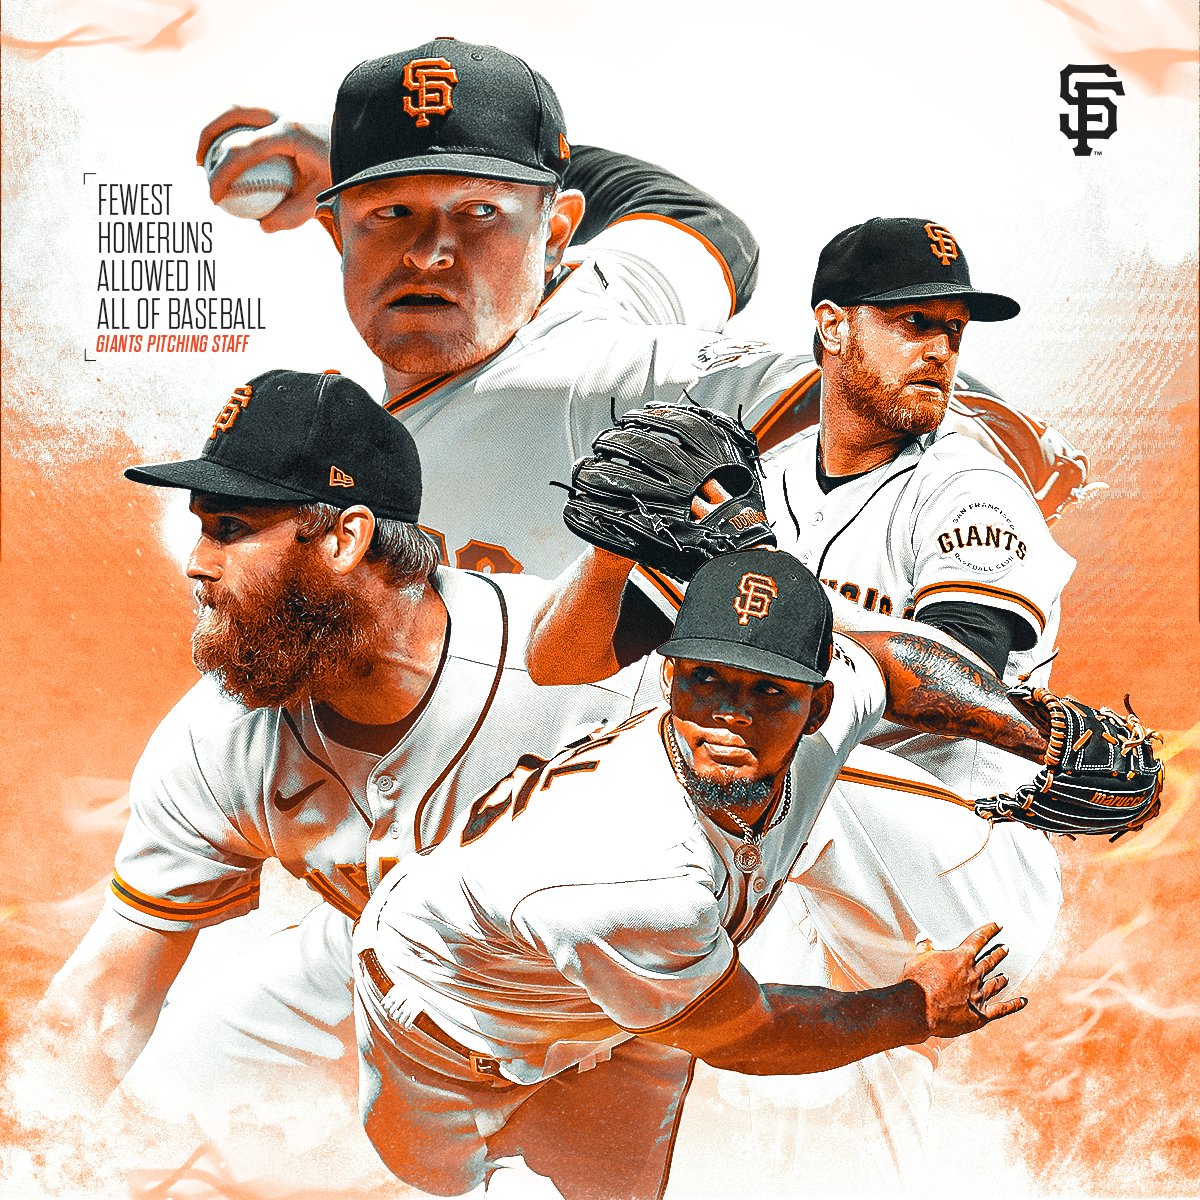 SFGiants on X: In honor of Fiesta Gigantes, the #SFGiants will